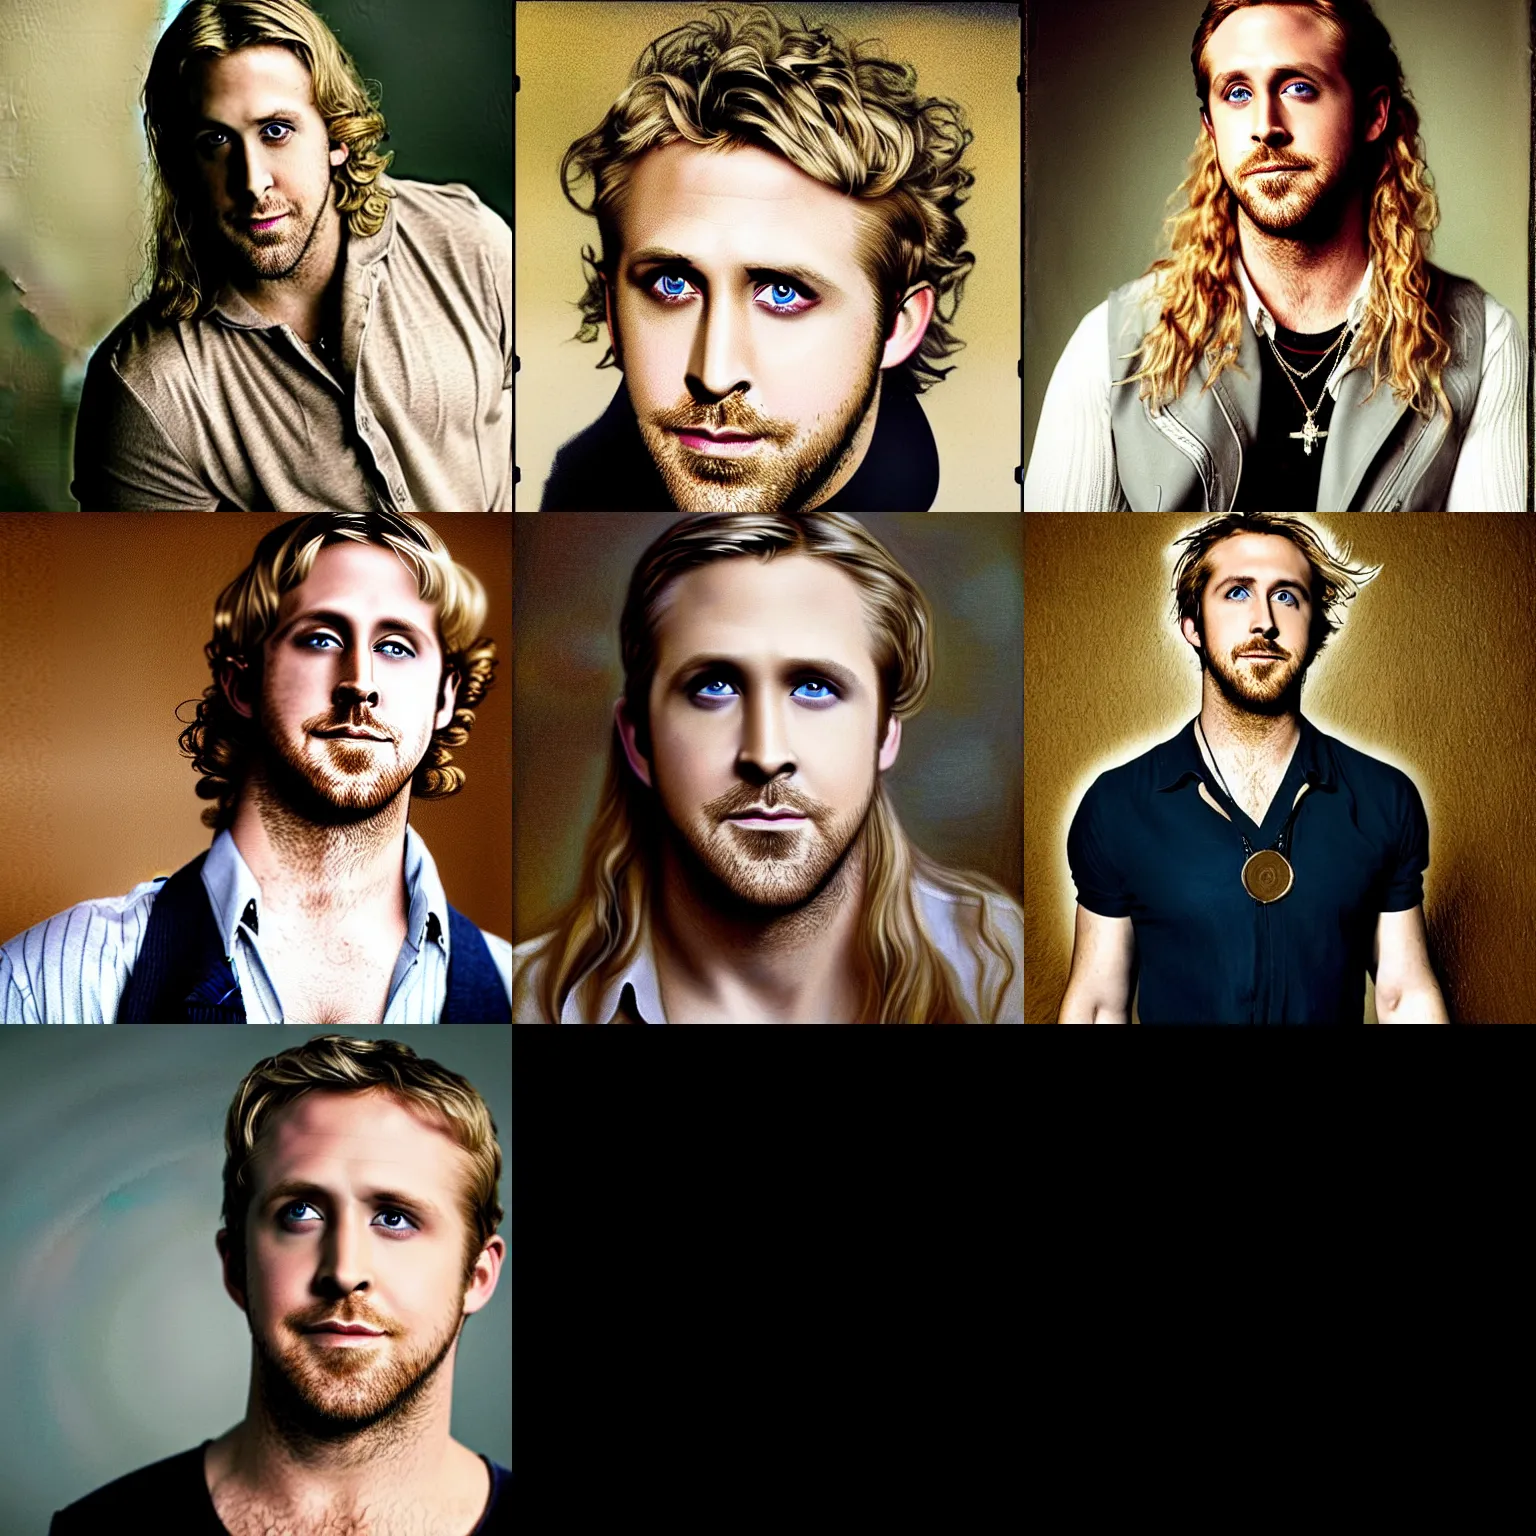 Prompt: Pre-Raphaelite portrait of actor, Ryan Gosling as the lead singer of the band Nickelback, with very long blond hair and grey eyes, high saturation